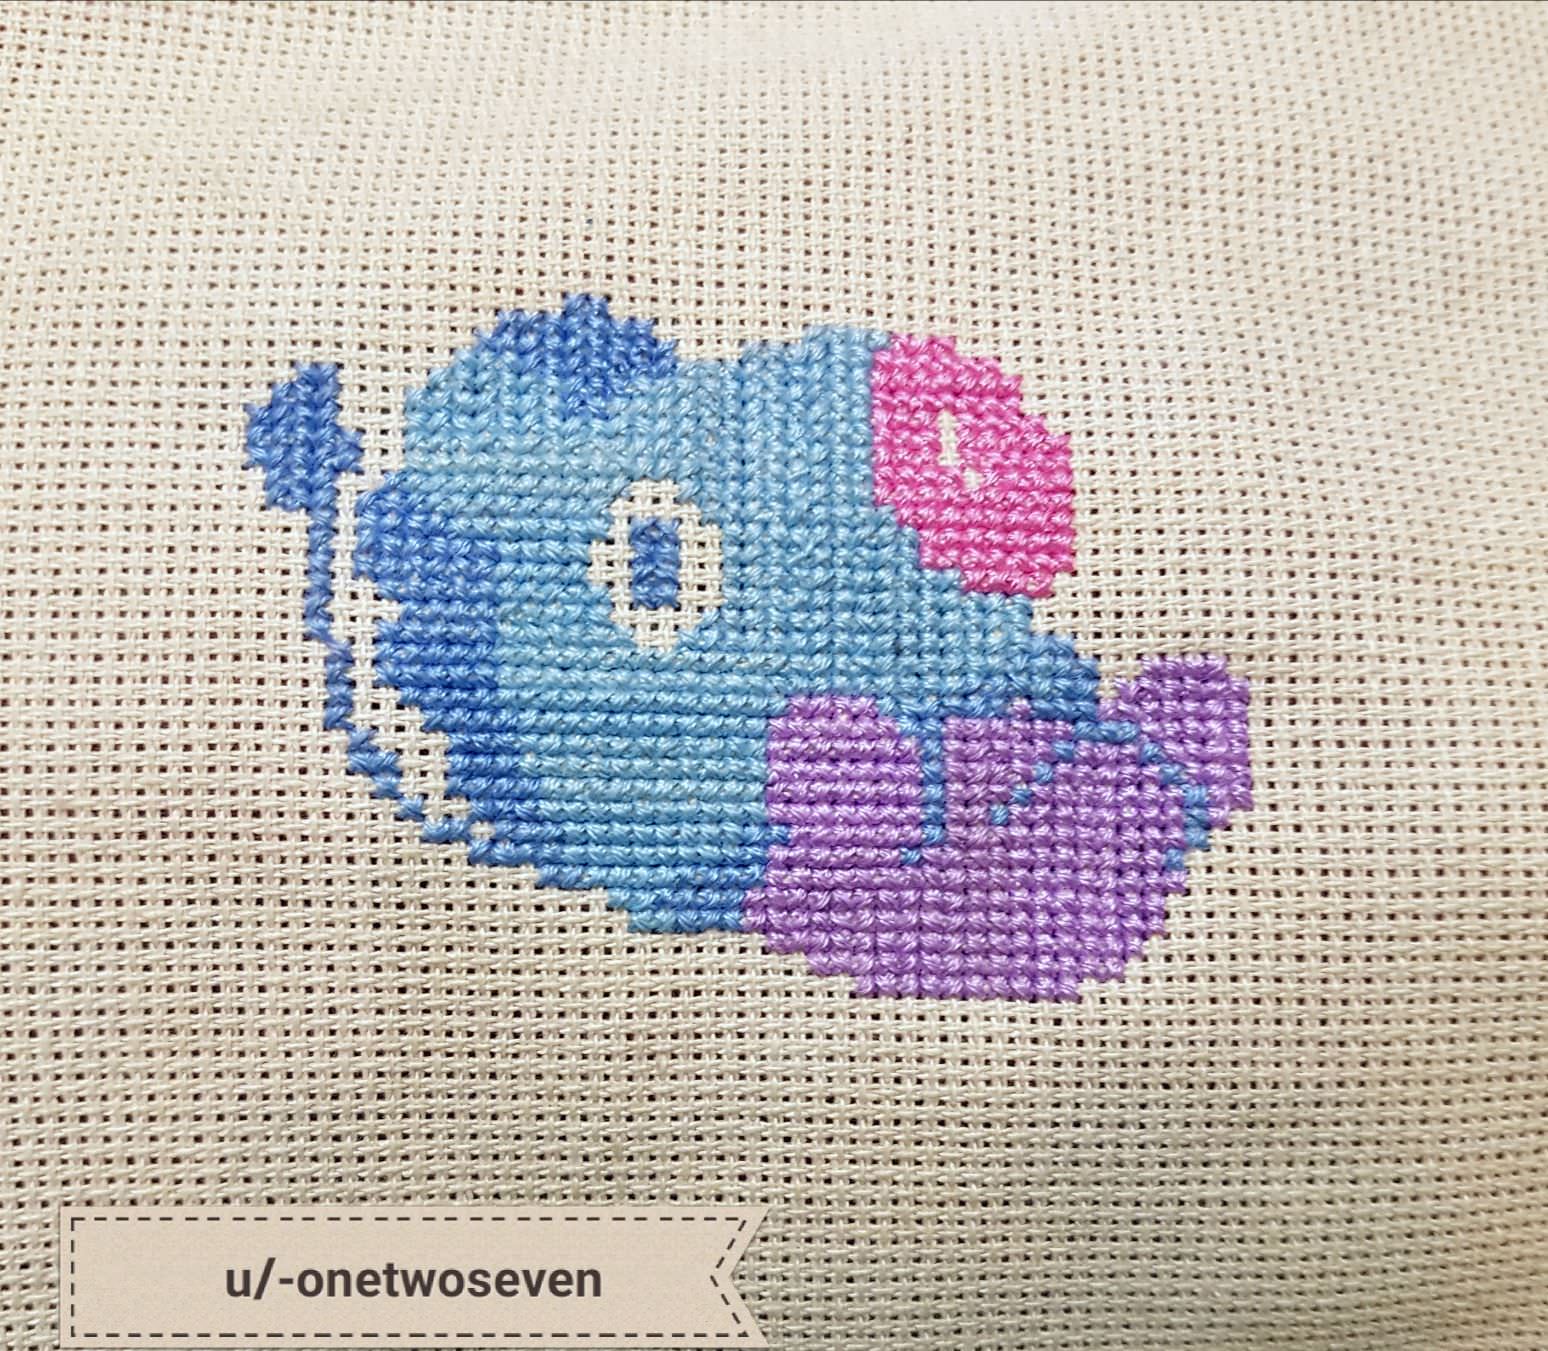 Mang Cross Stitch (with pattern in comments) - Imgur